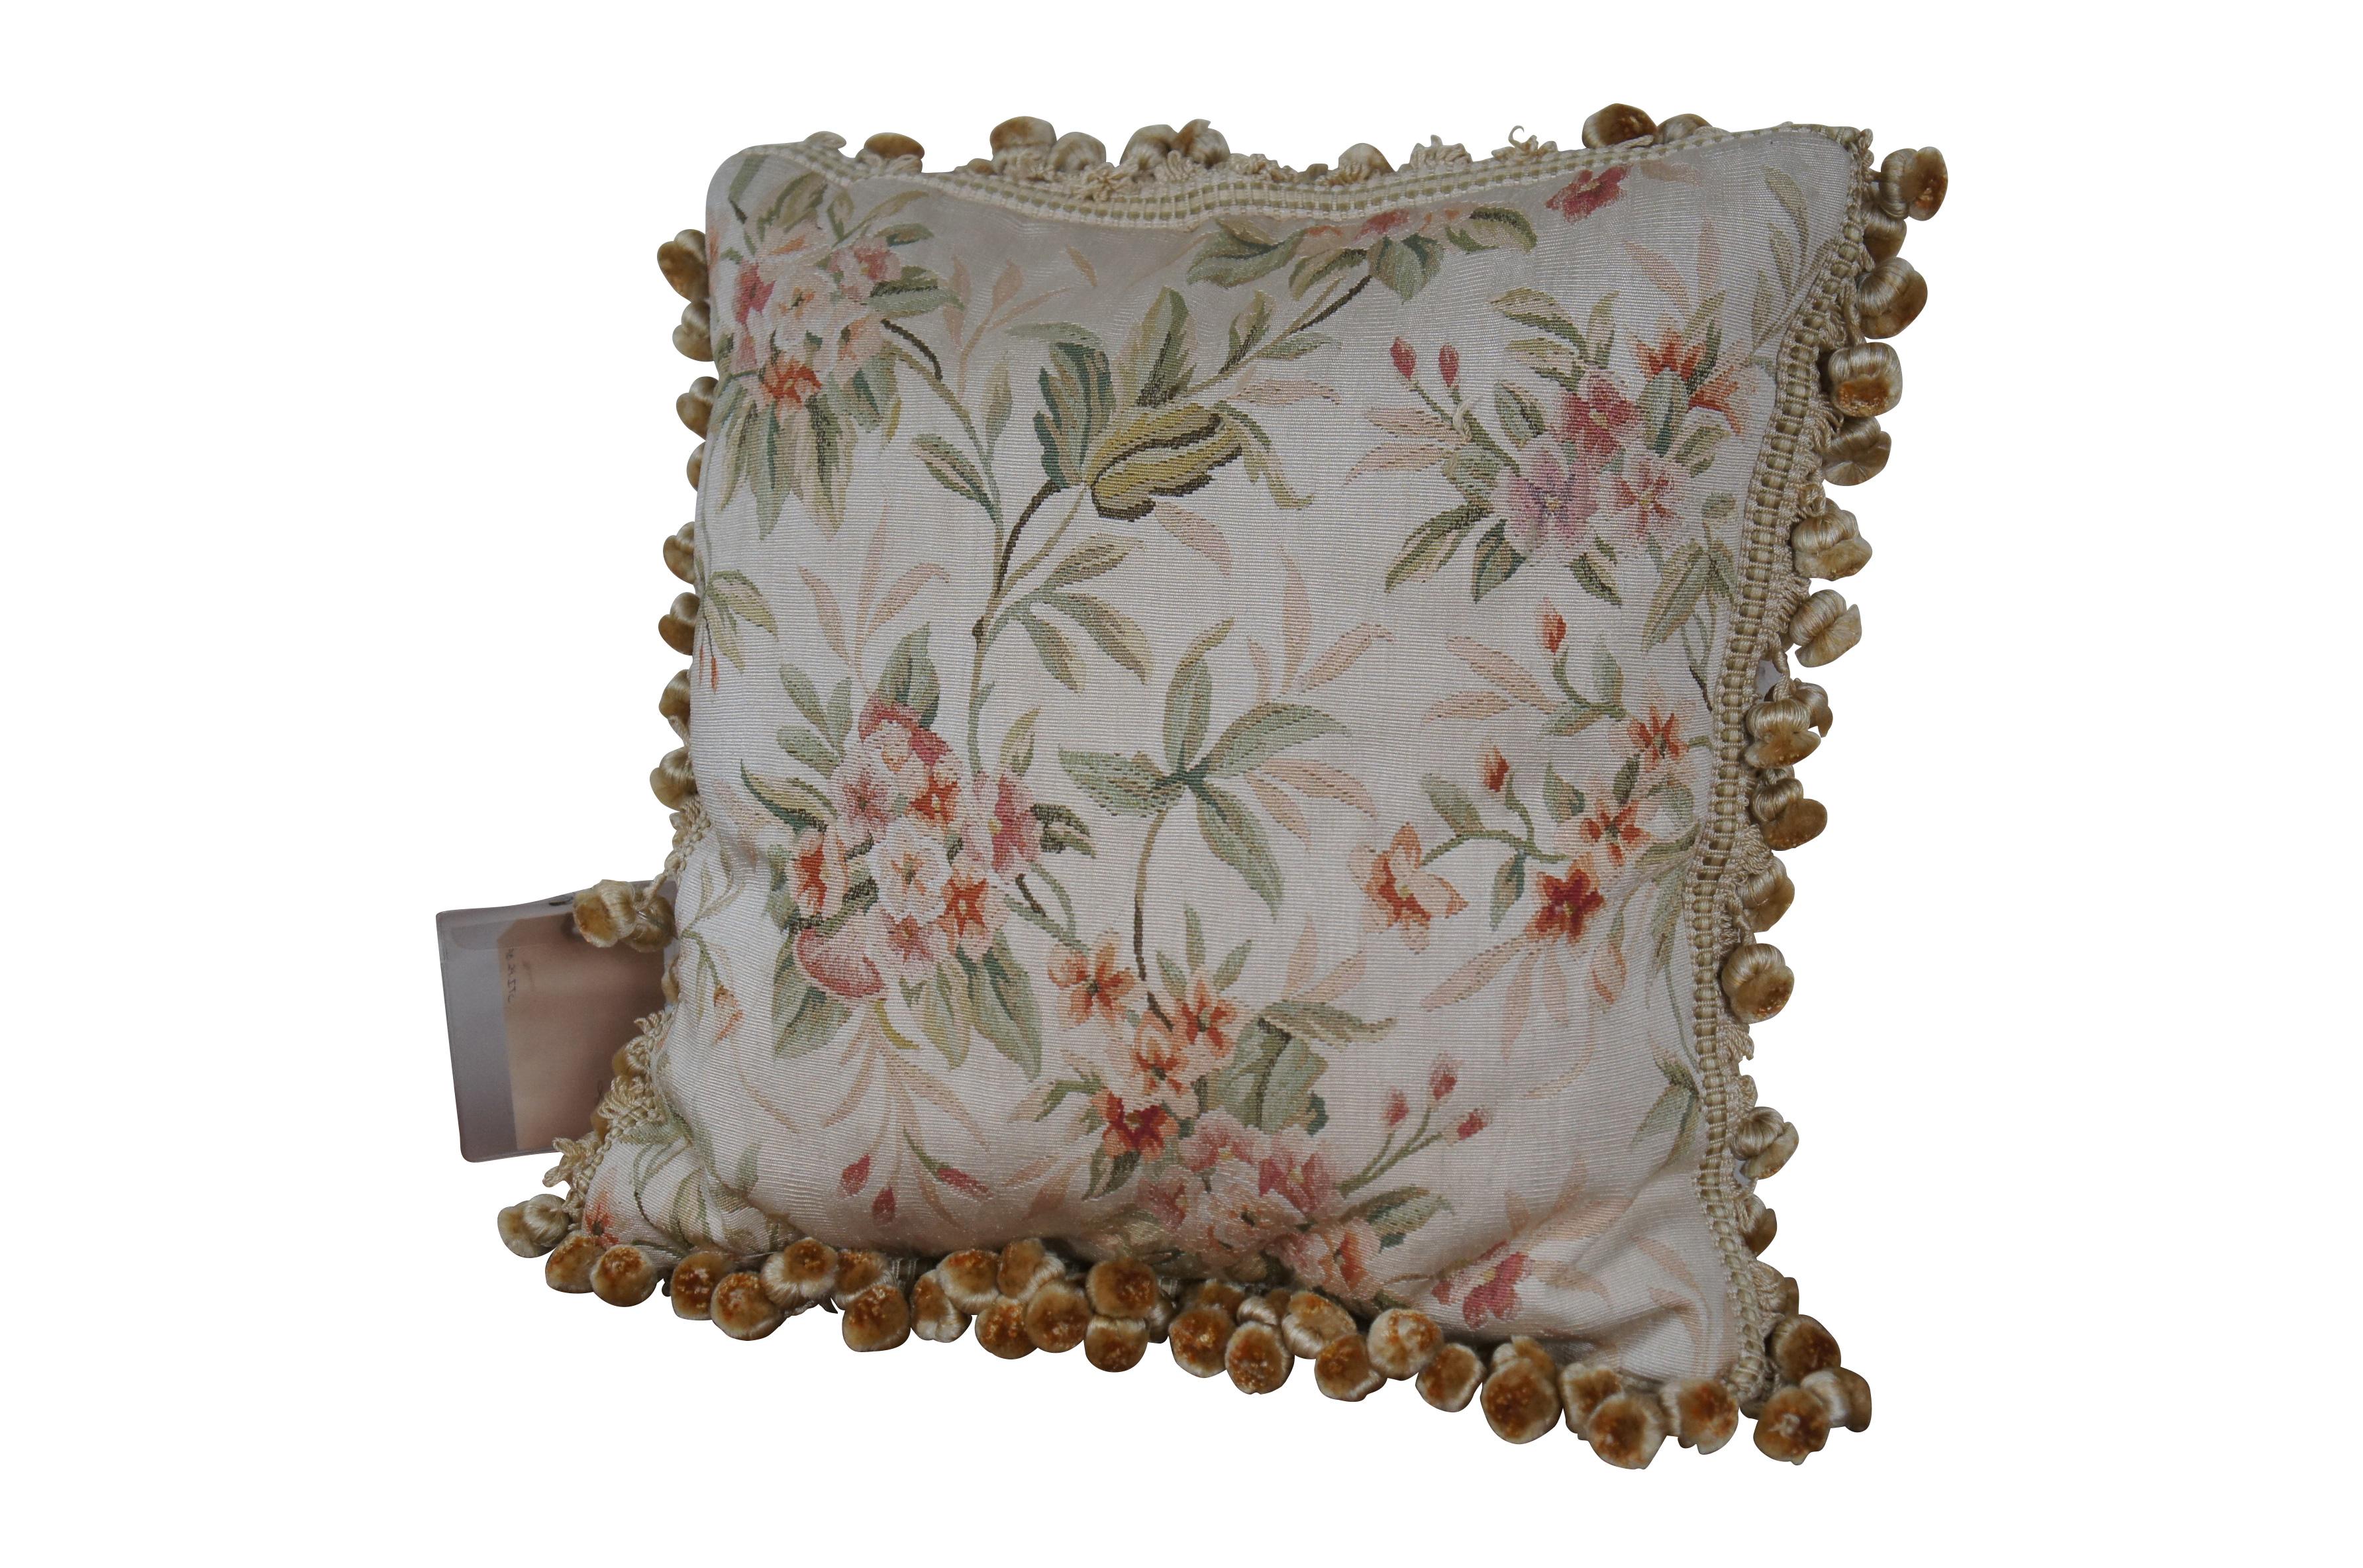 20th century Aubusson style square throw pillow, embroidered in silk with bunches of pink and rust colored flowers amid stems of green and pale pink leaves. Cream ball tassel trim.  Light brown velour back with zipper closure. Down